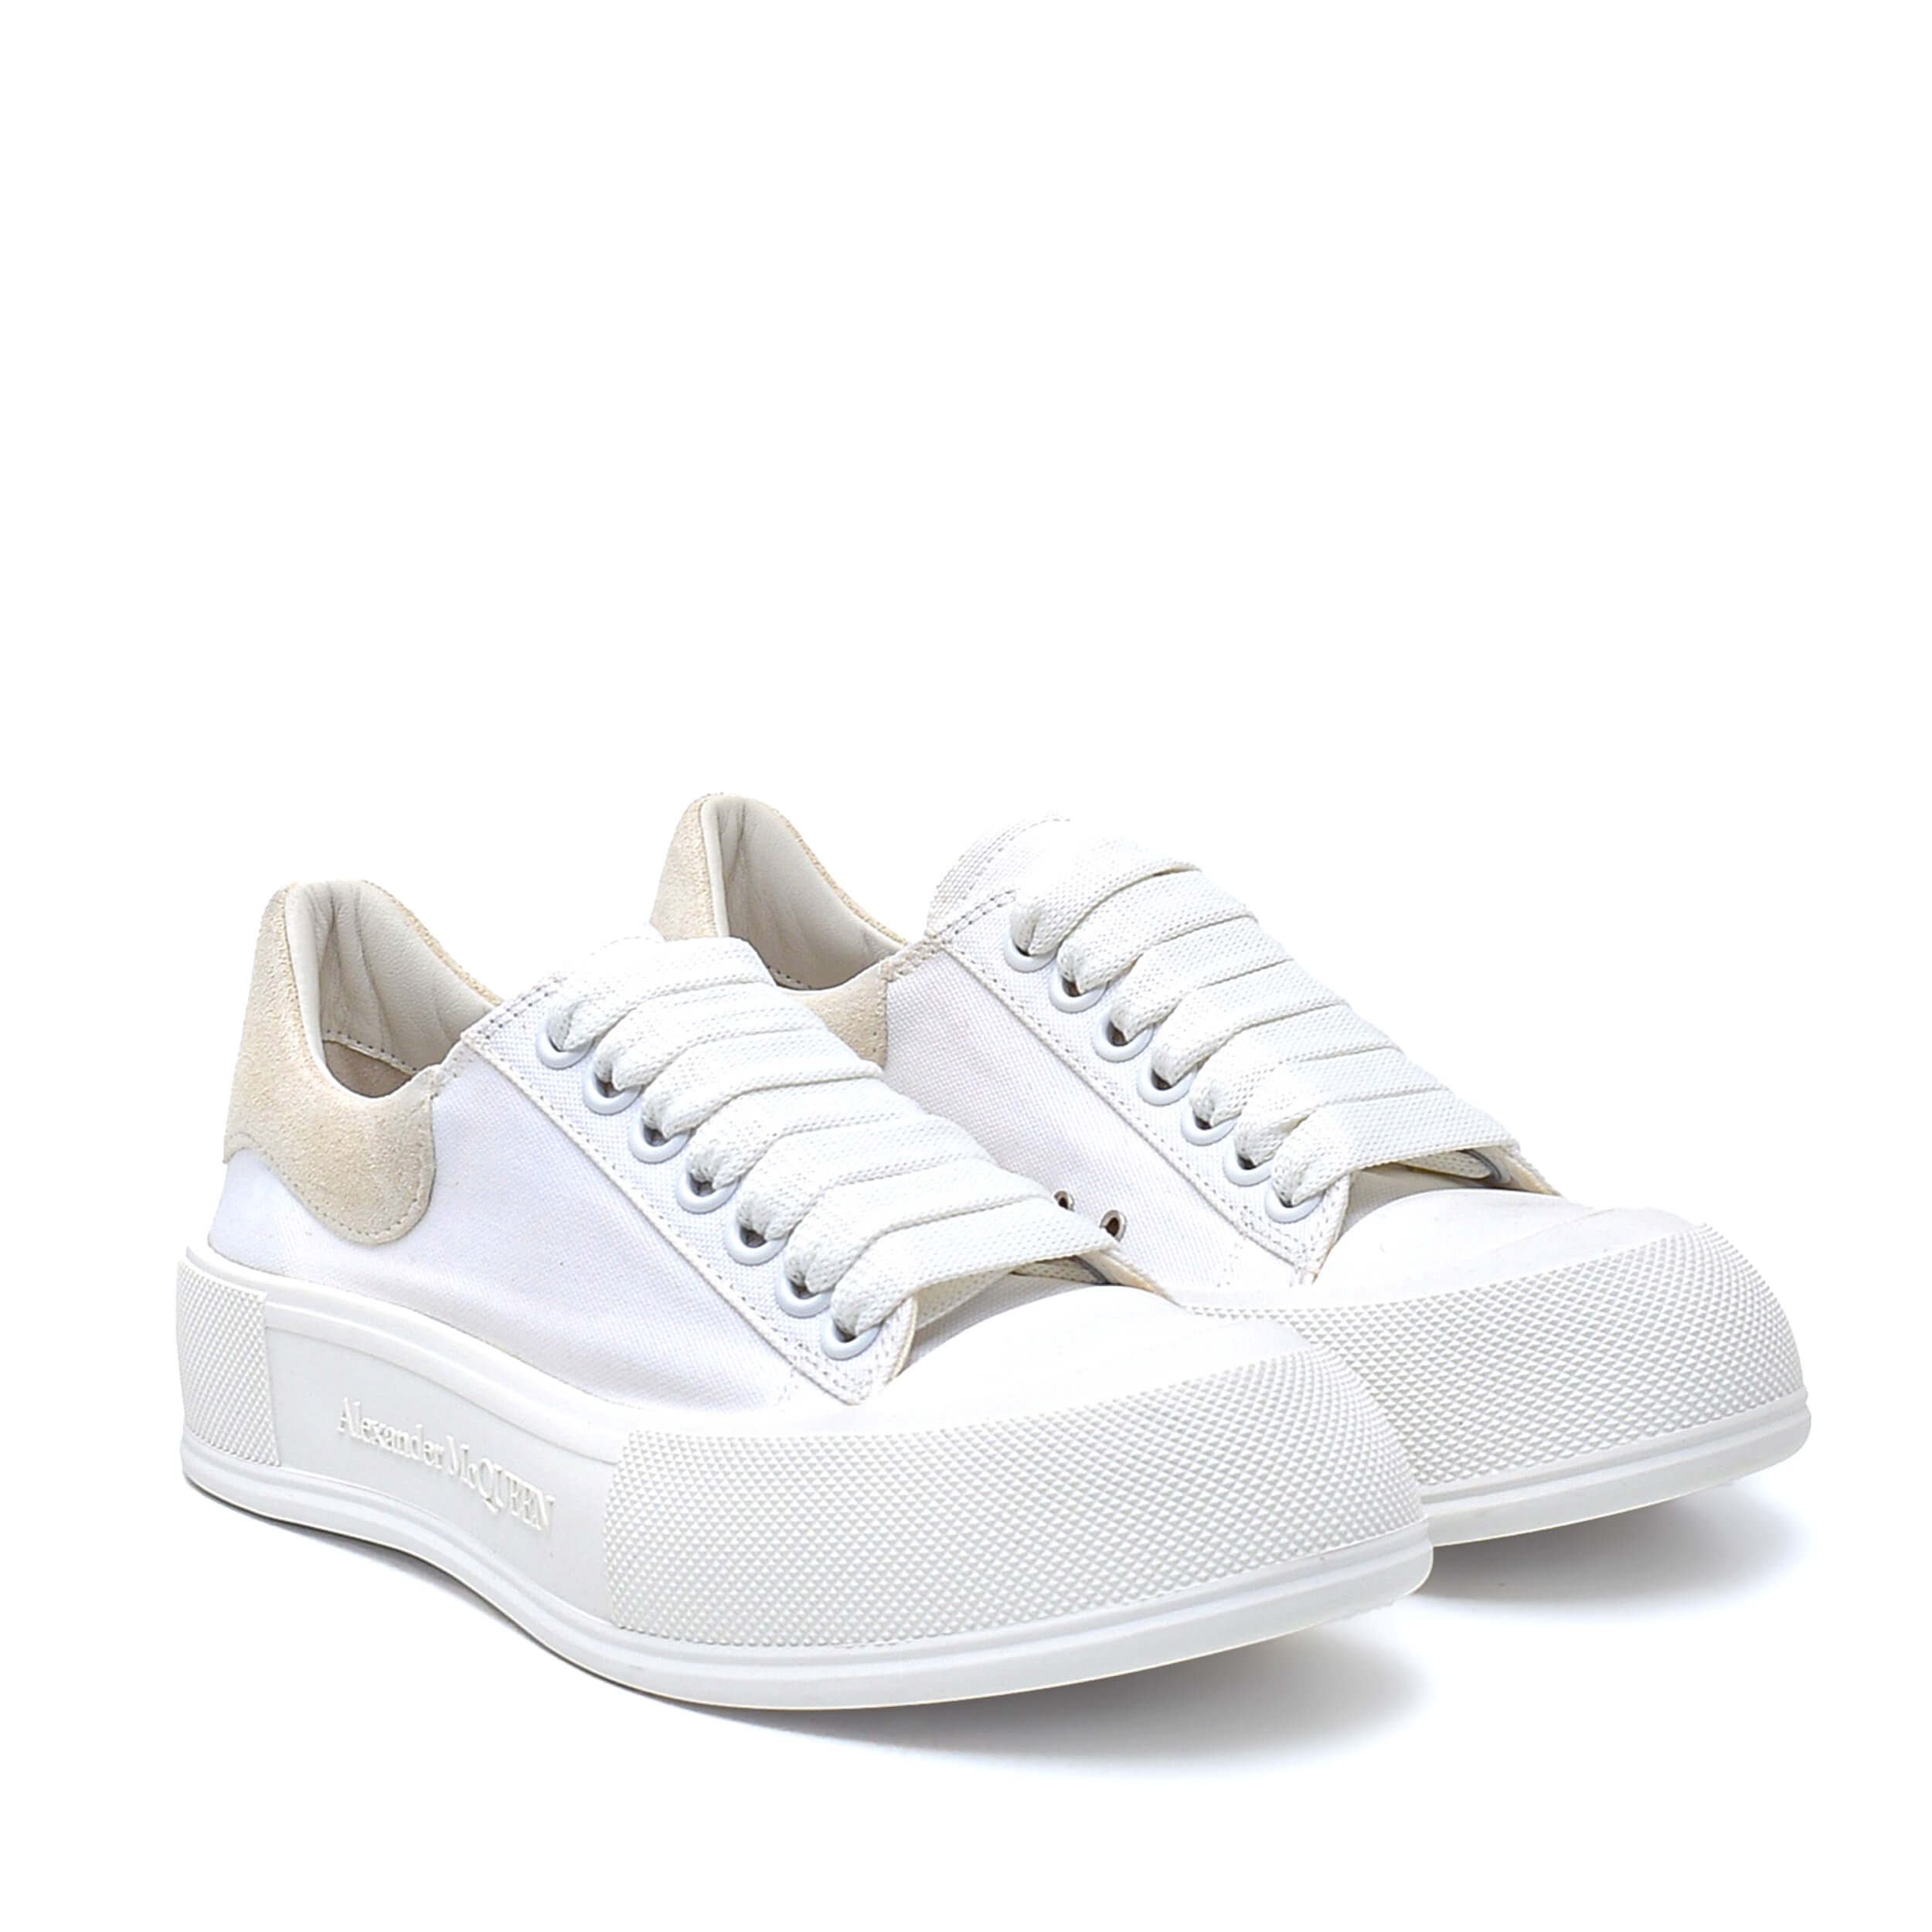 Alexander McQueen - White Canvas Lace Sneakers / 38